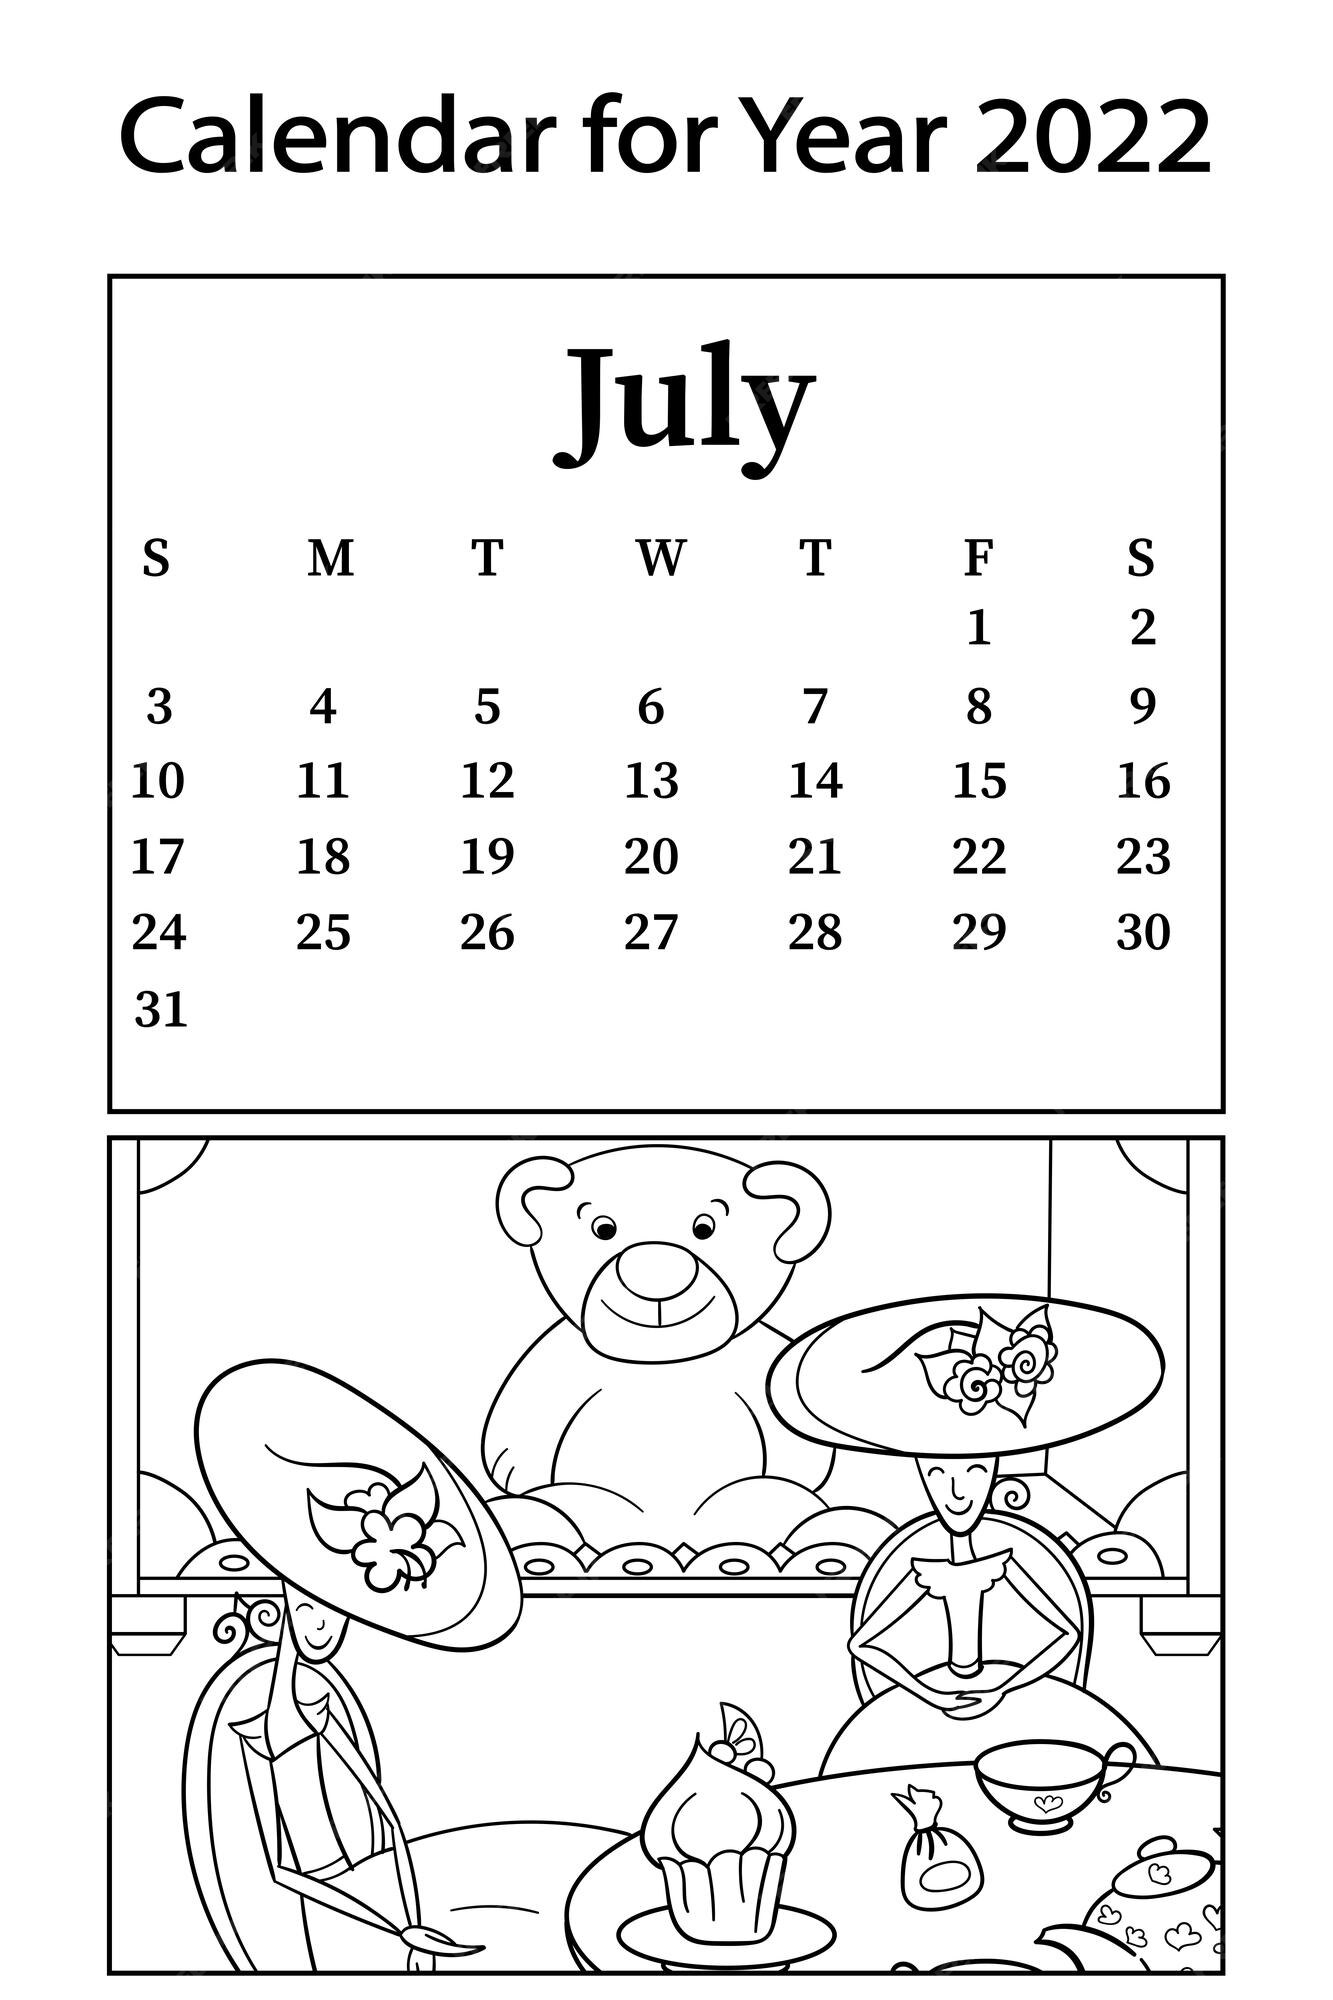 Premium vector calendar for month of july vector coloring book dollhouse with toys dolls tea party